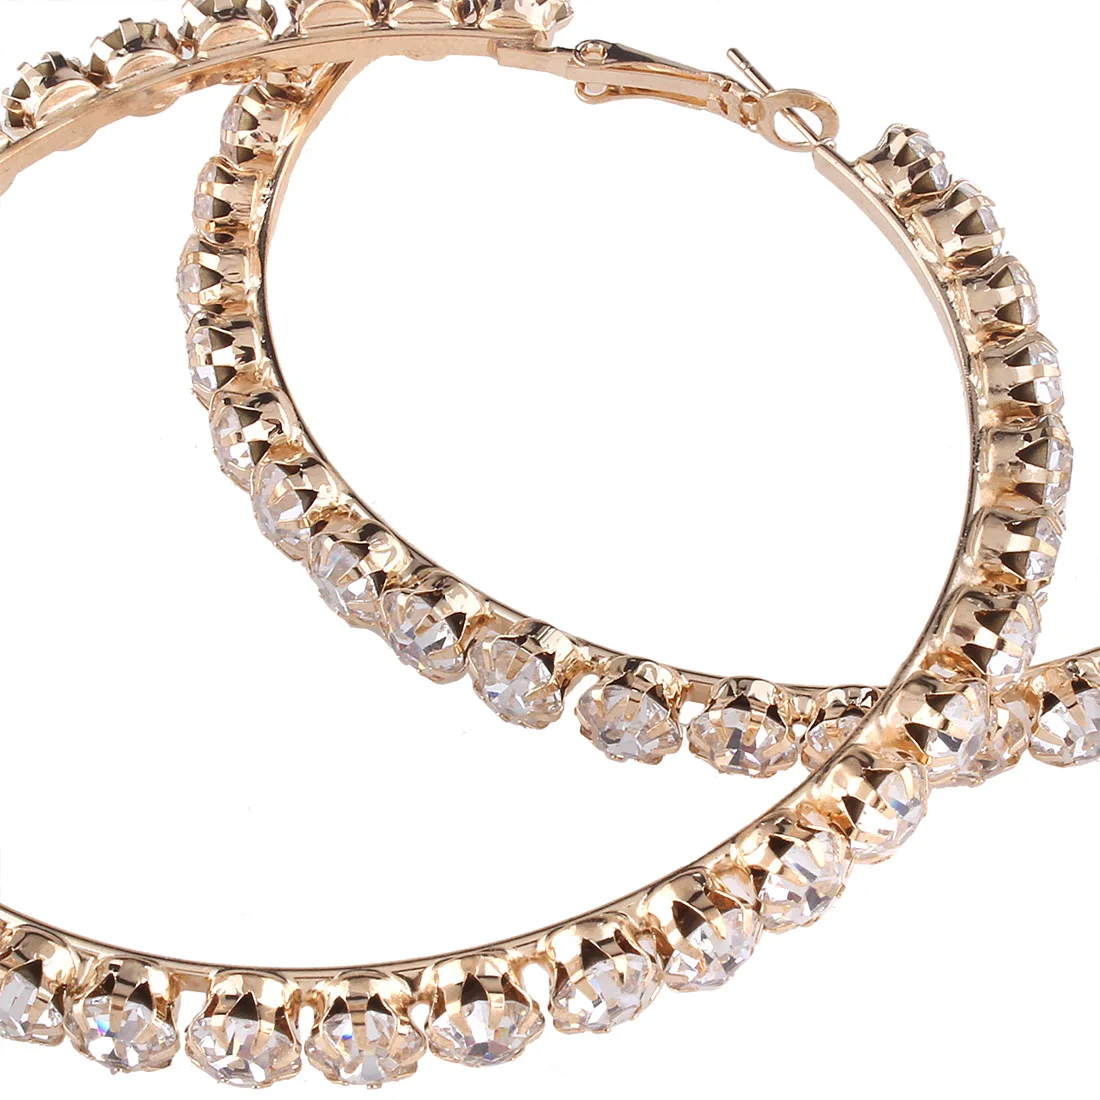 New Trendy Gold Plated Circle Large Rhinestone Hoop Earrings For Women